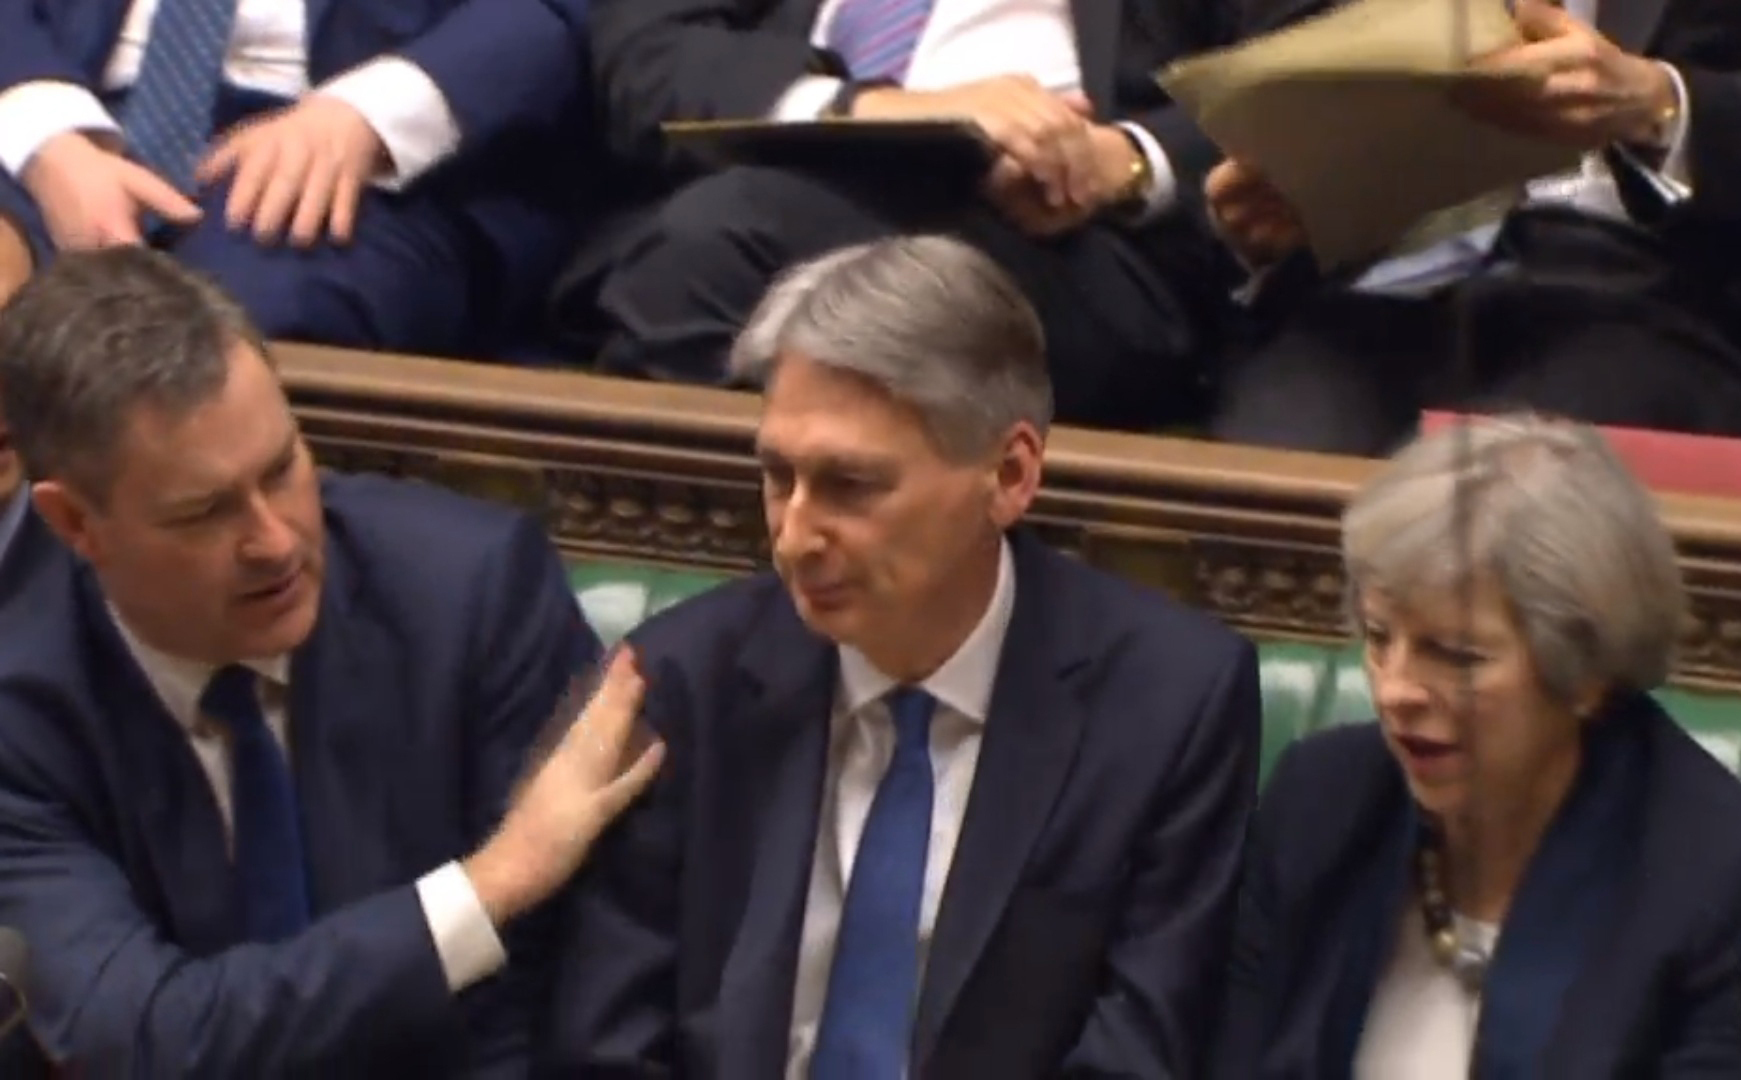 Chief Secretary to the Treasury David Gauke pats Chancellor of the Exchequer Philip Hammond on the shoulder after he made his Budget statement to MPs in the House of Commons. (PA Wire)